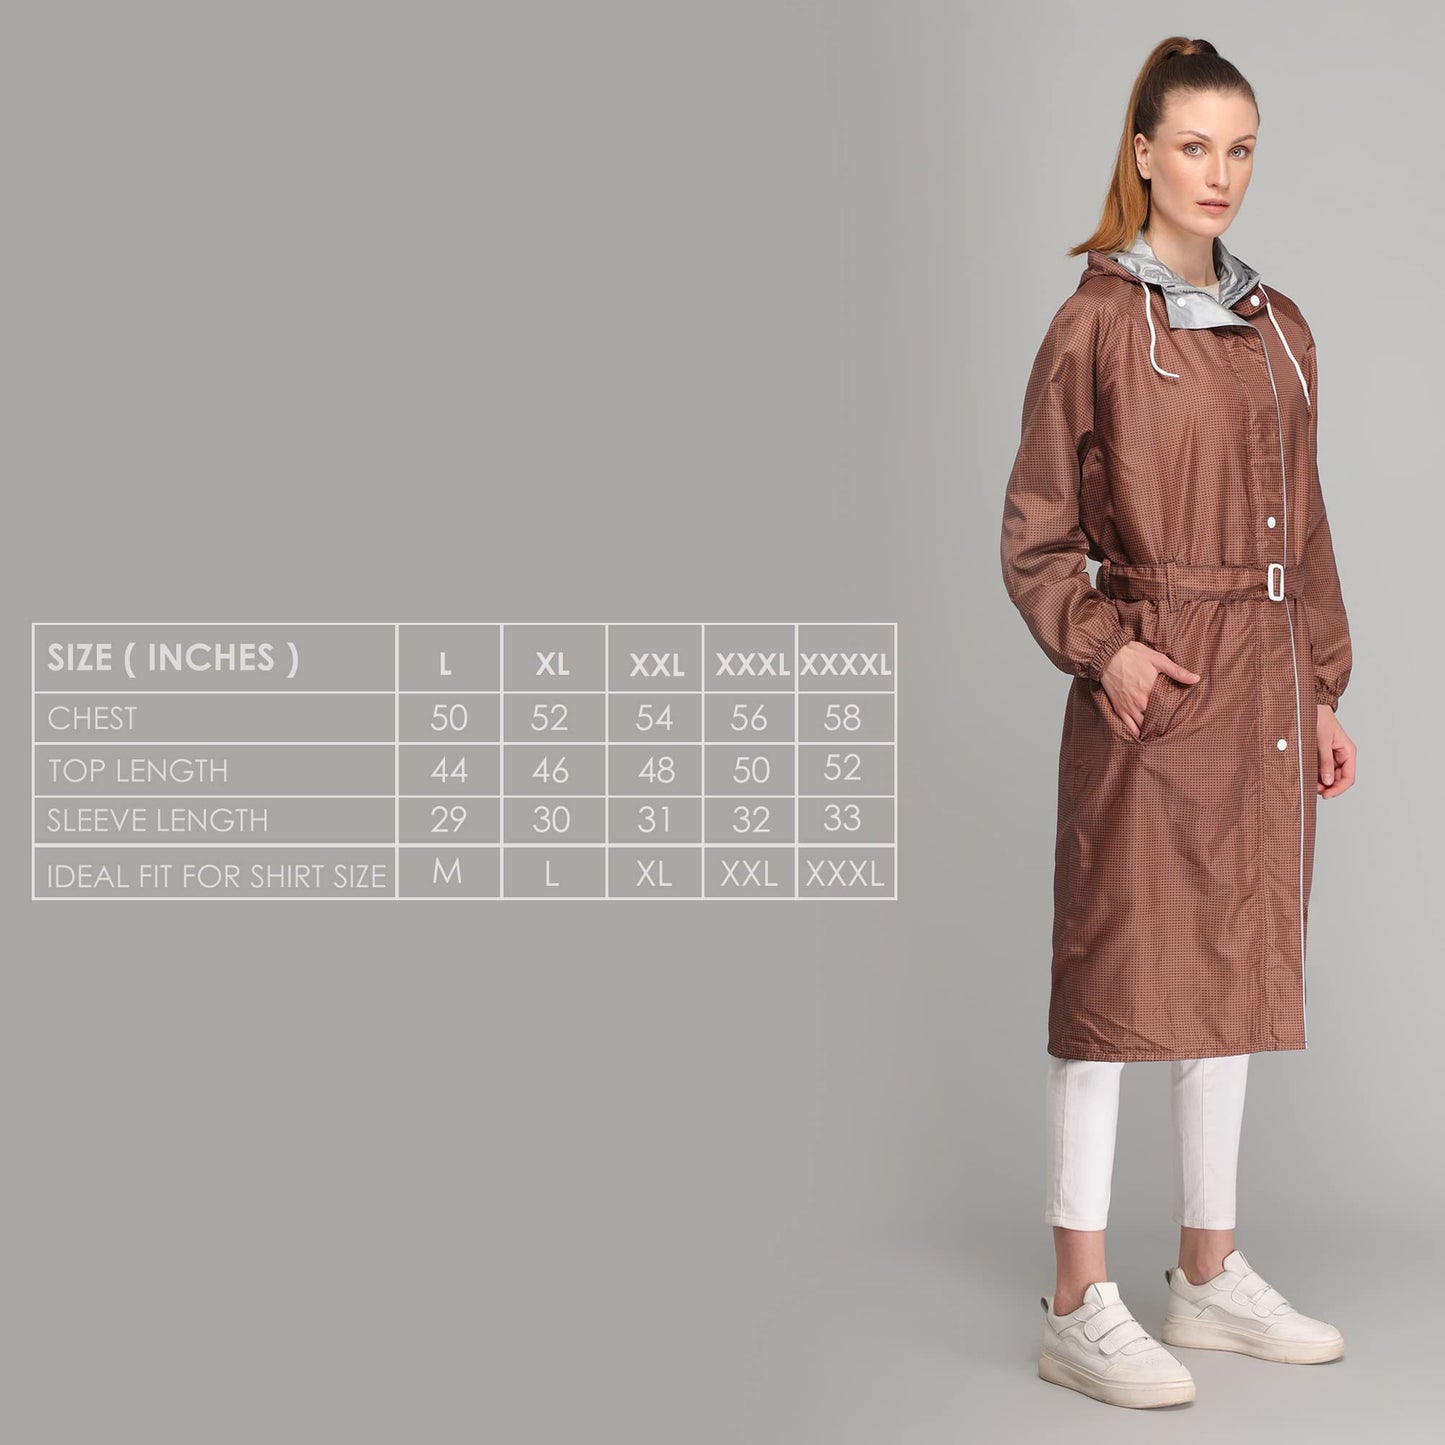 THE CLOWNFISH Polyester Long Length Raincoats For Women Waterproof Reversible Double Layer. Brilliant Pro Series (Brown, 2XL)